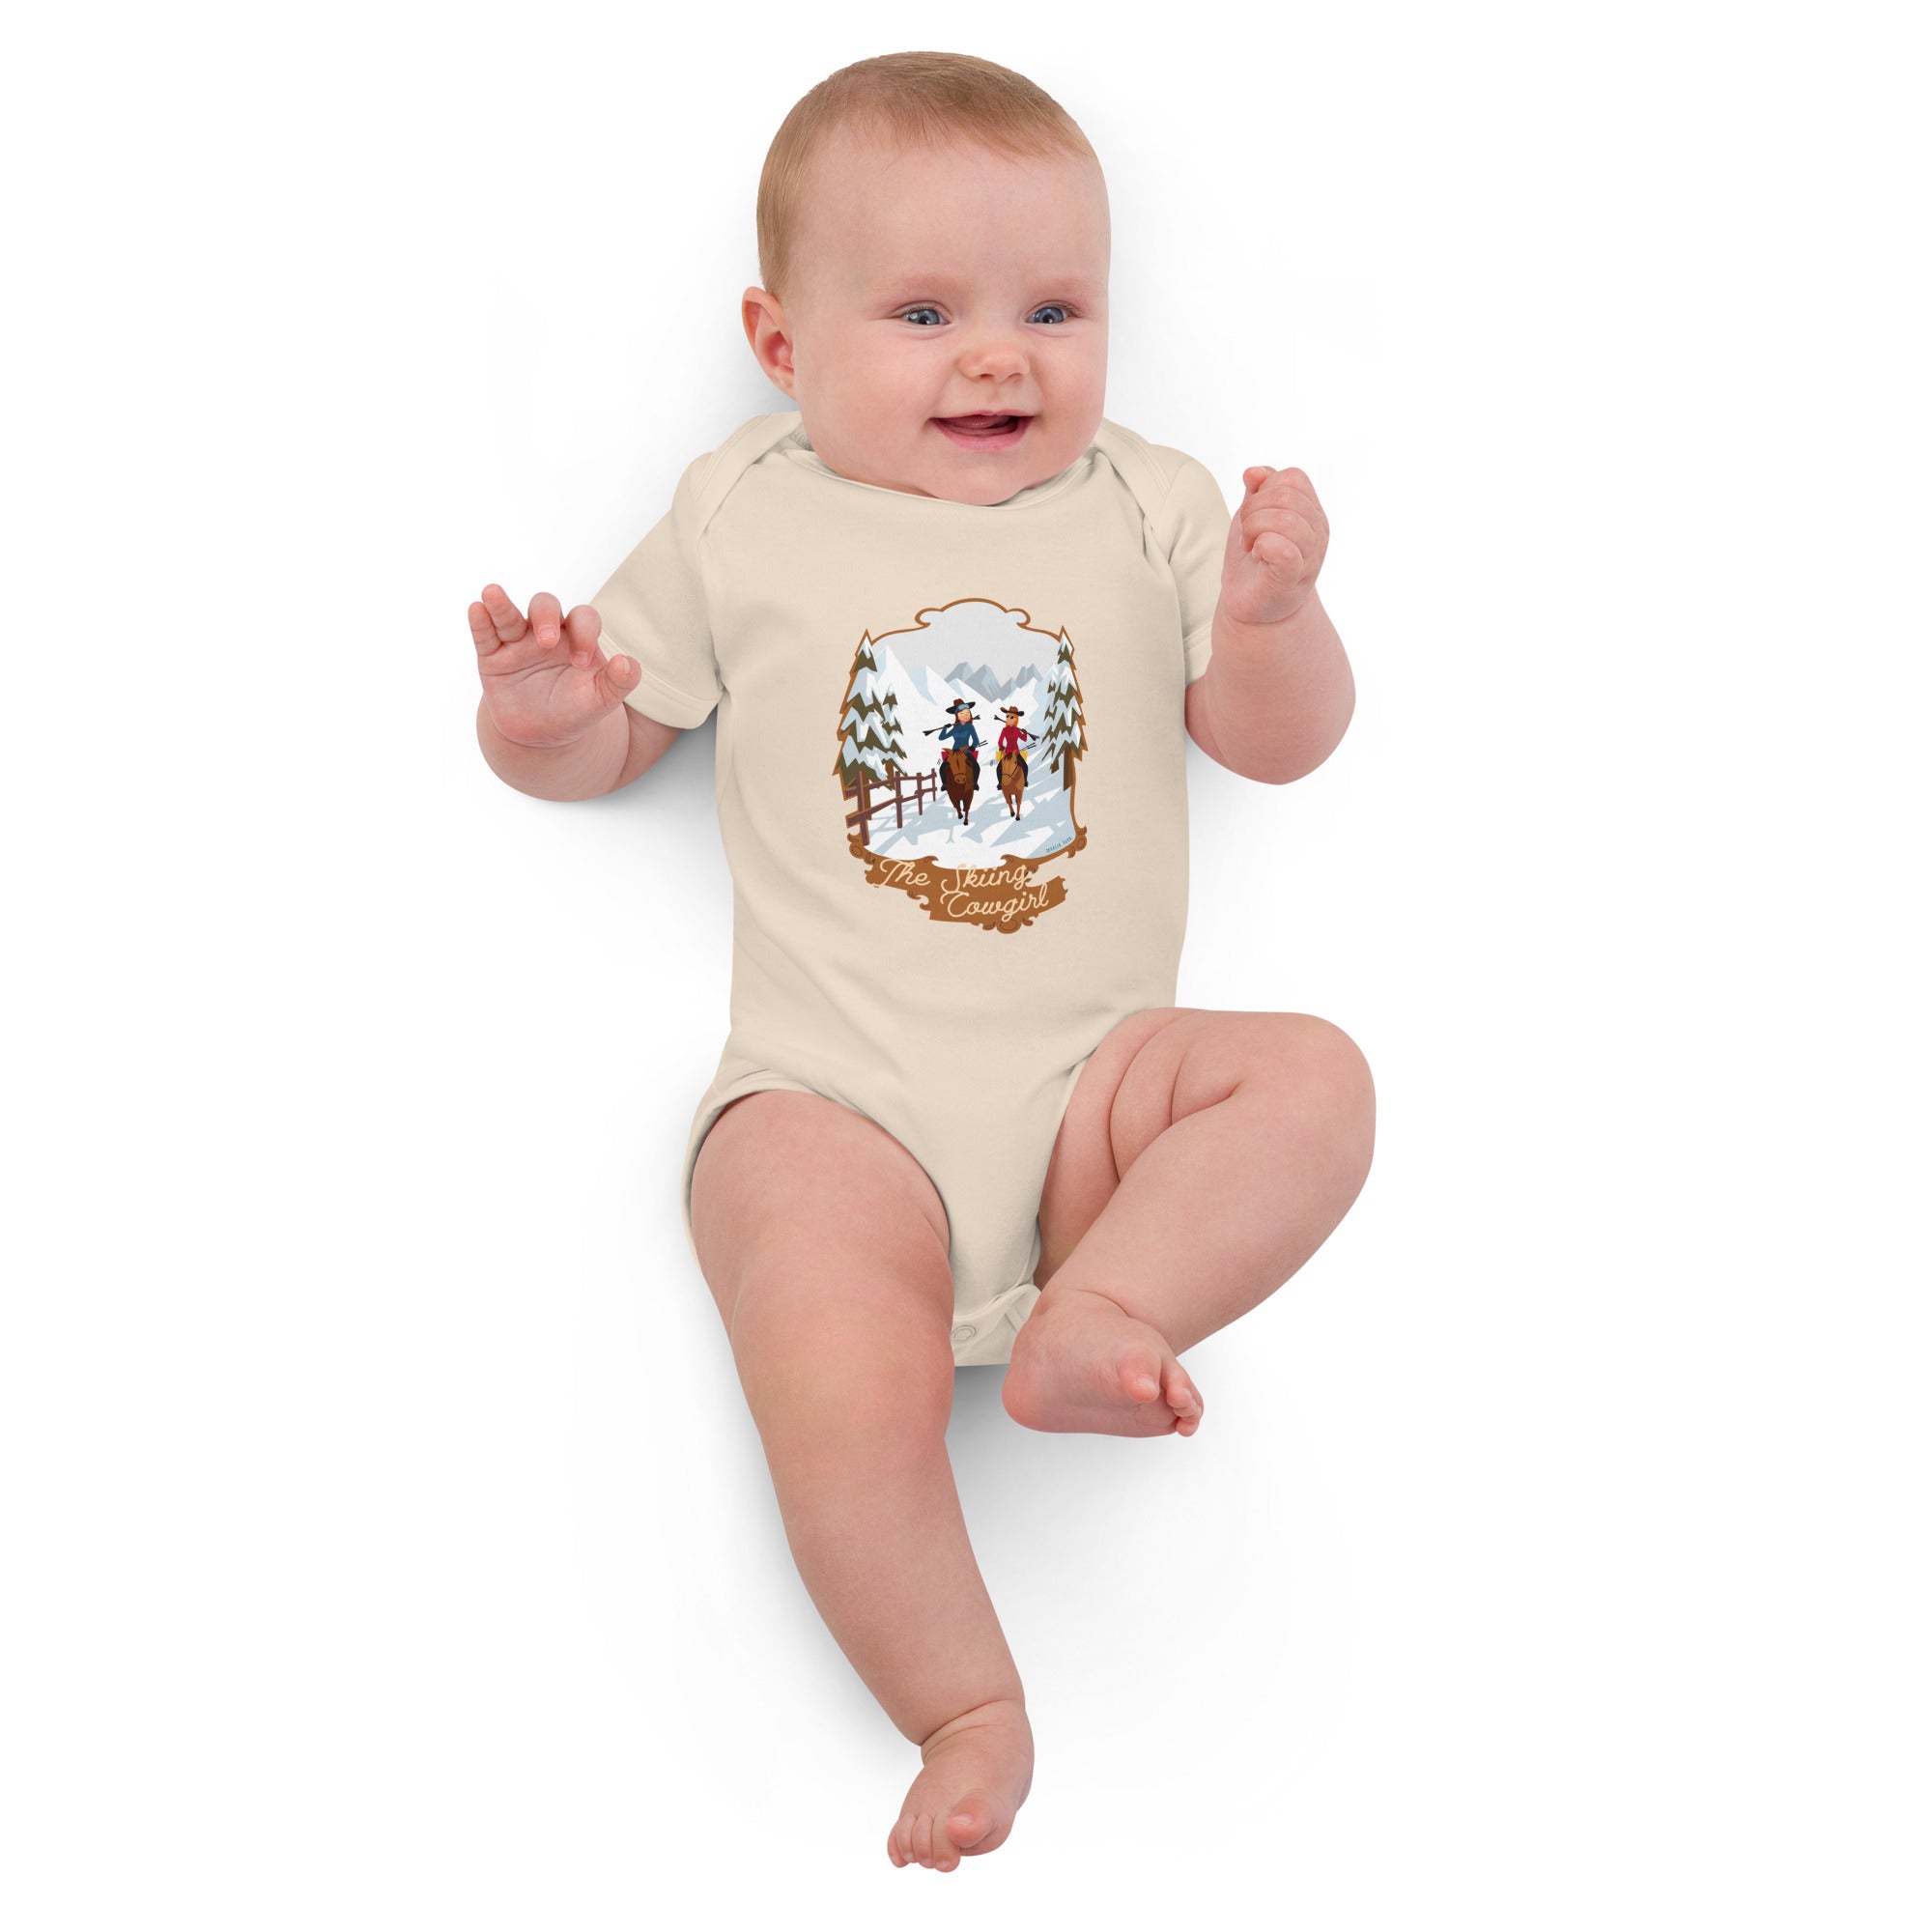 Organic cotton baby bodysuit The Skiing Cowgirl